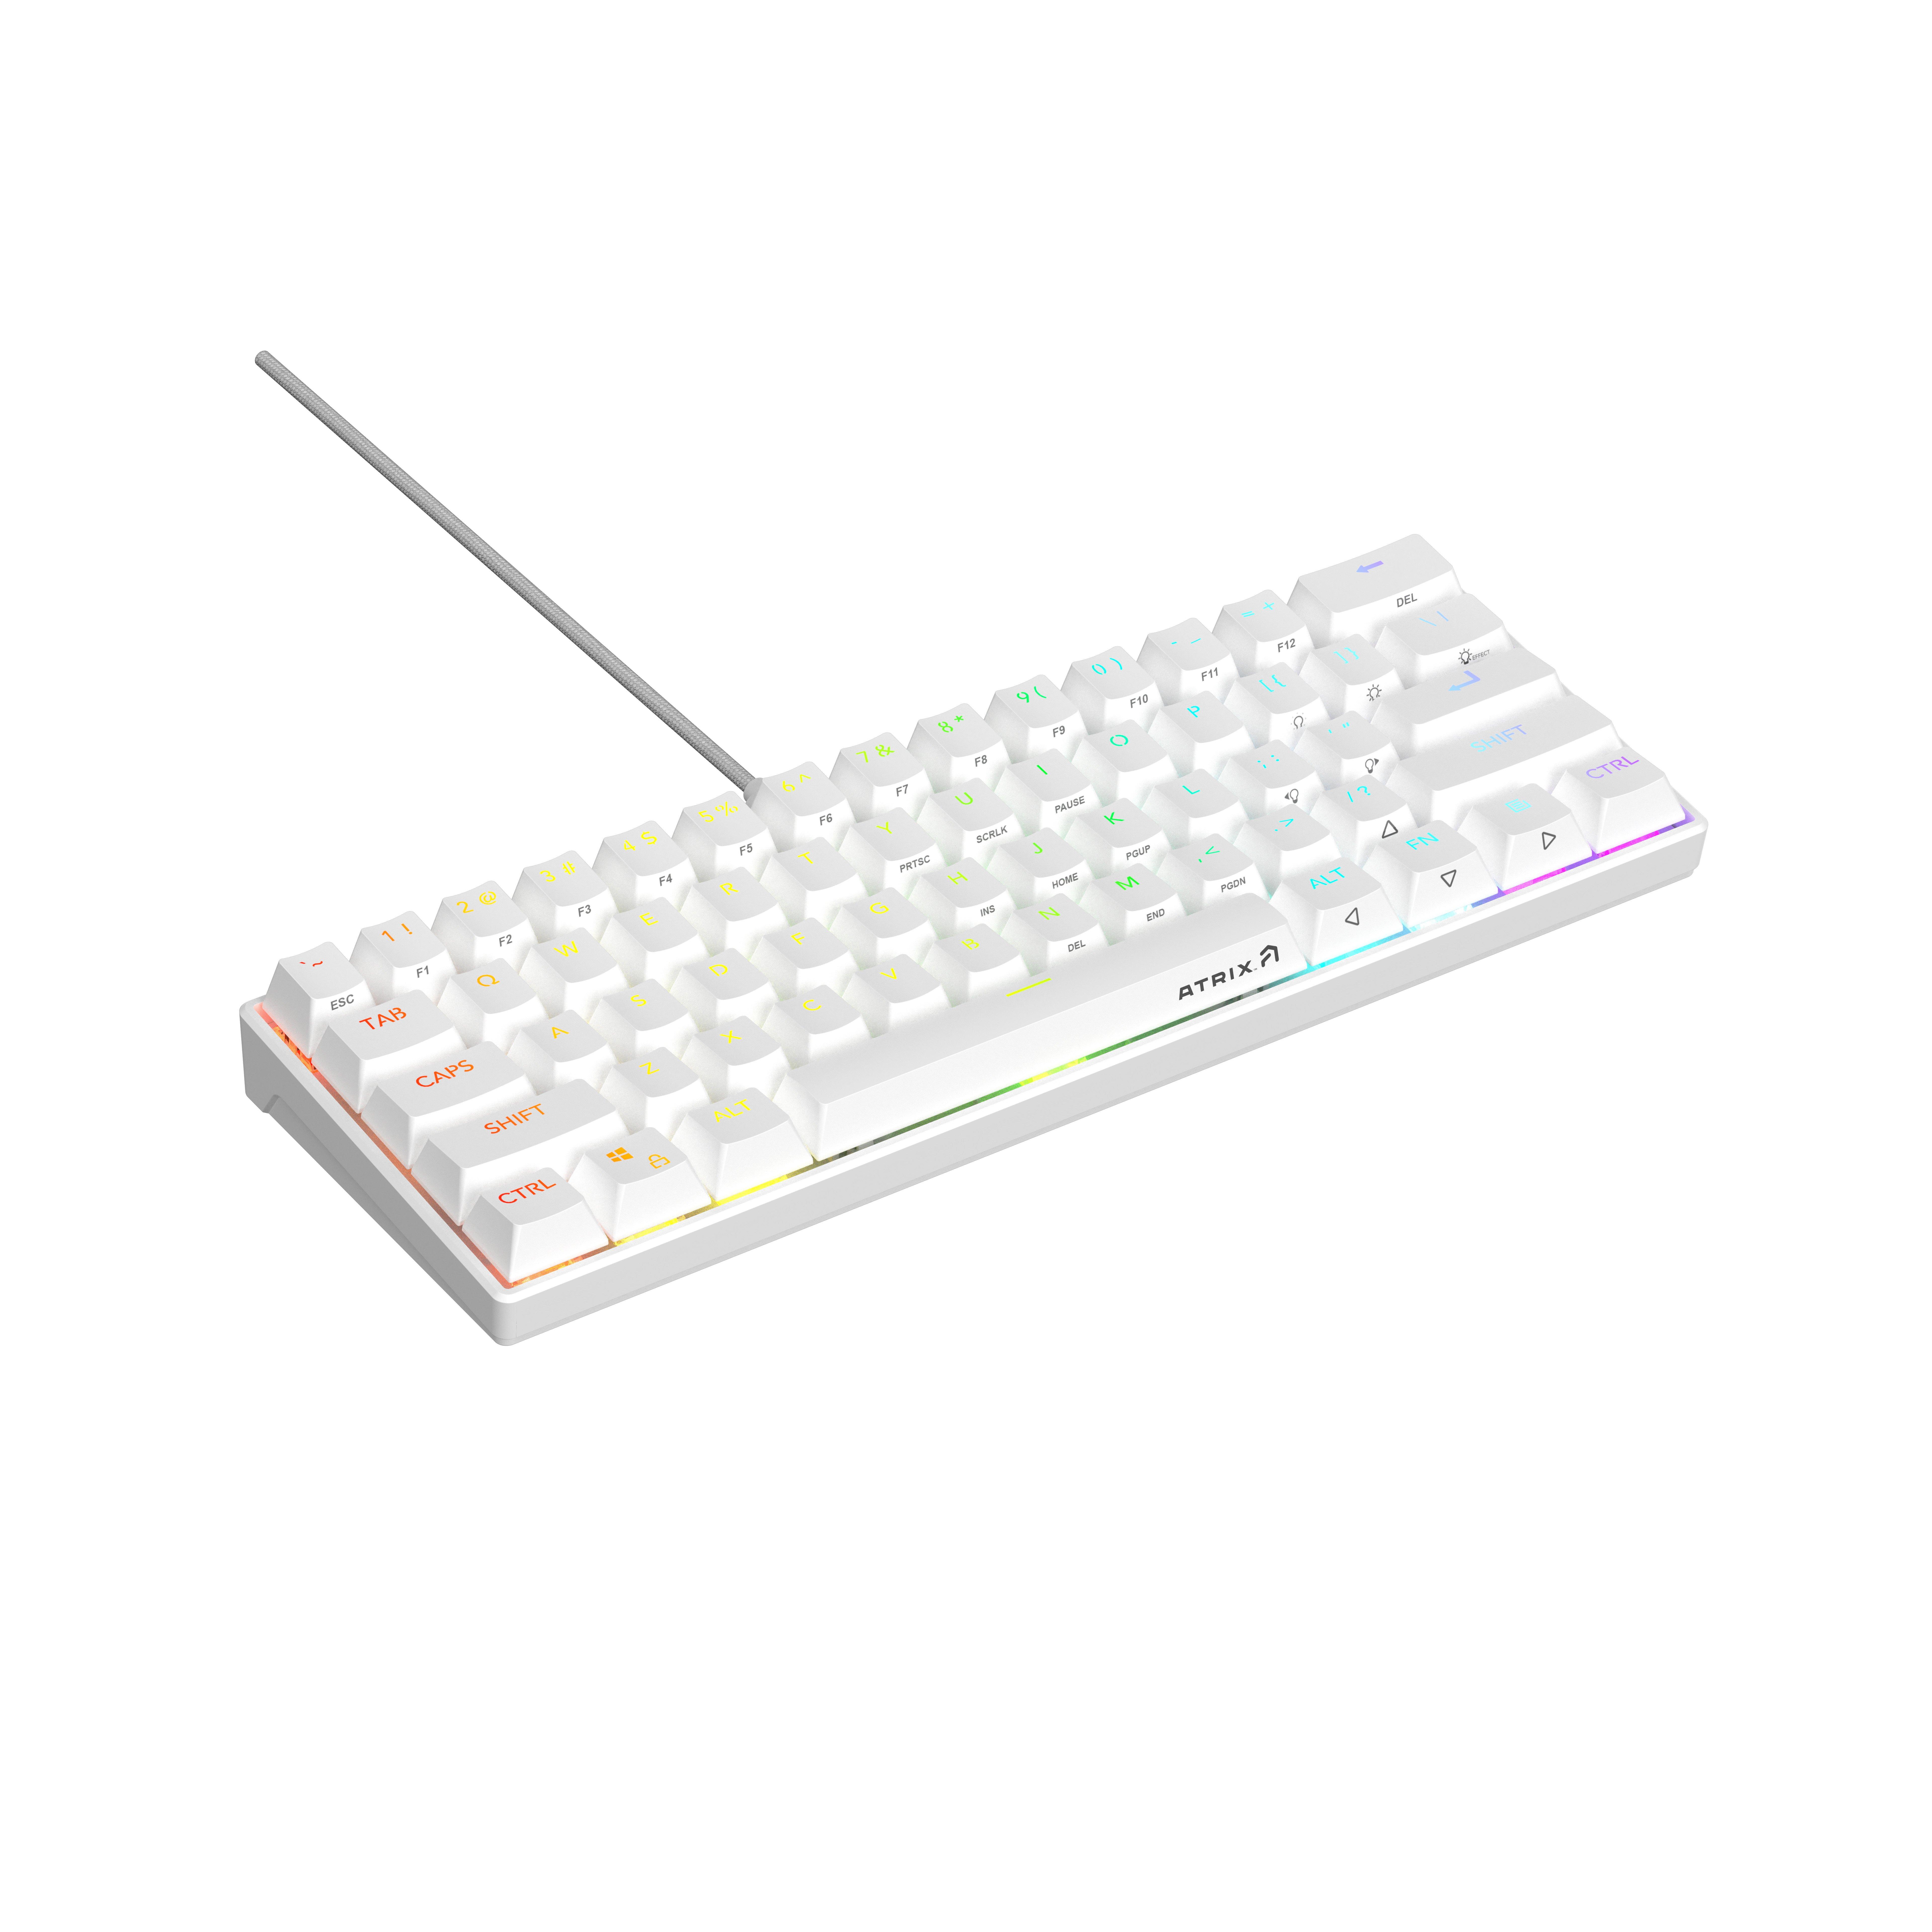 Atrix 60 Percent Wired Brown Switch Mechanical Keyboard with RGB GameStop  Exclusive